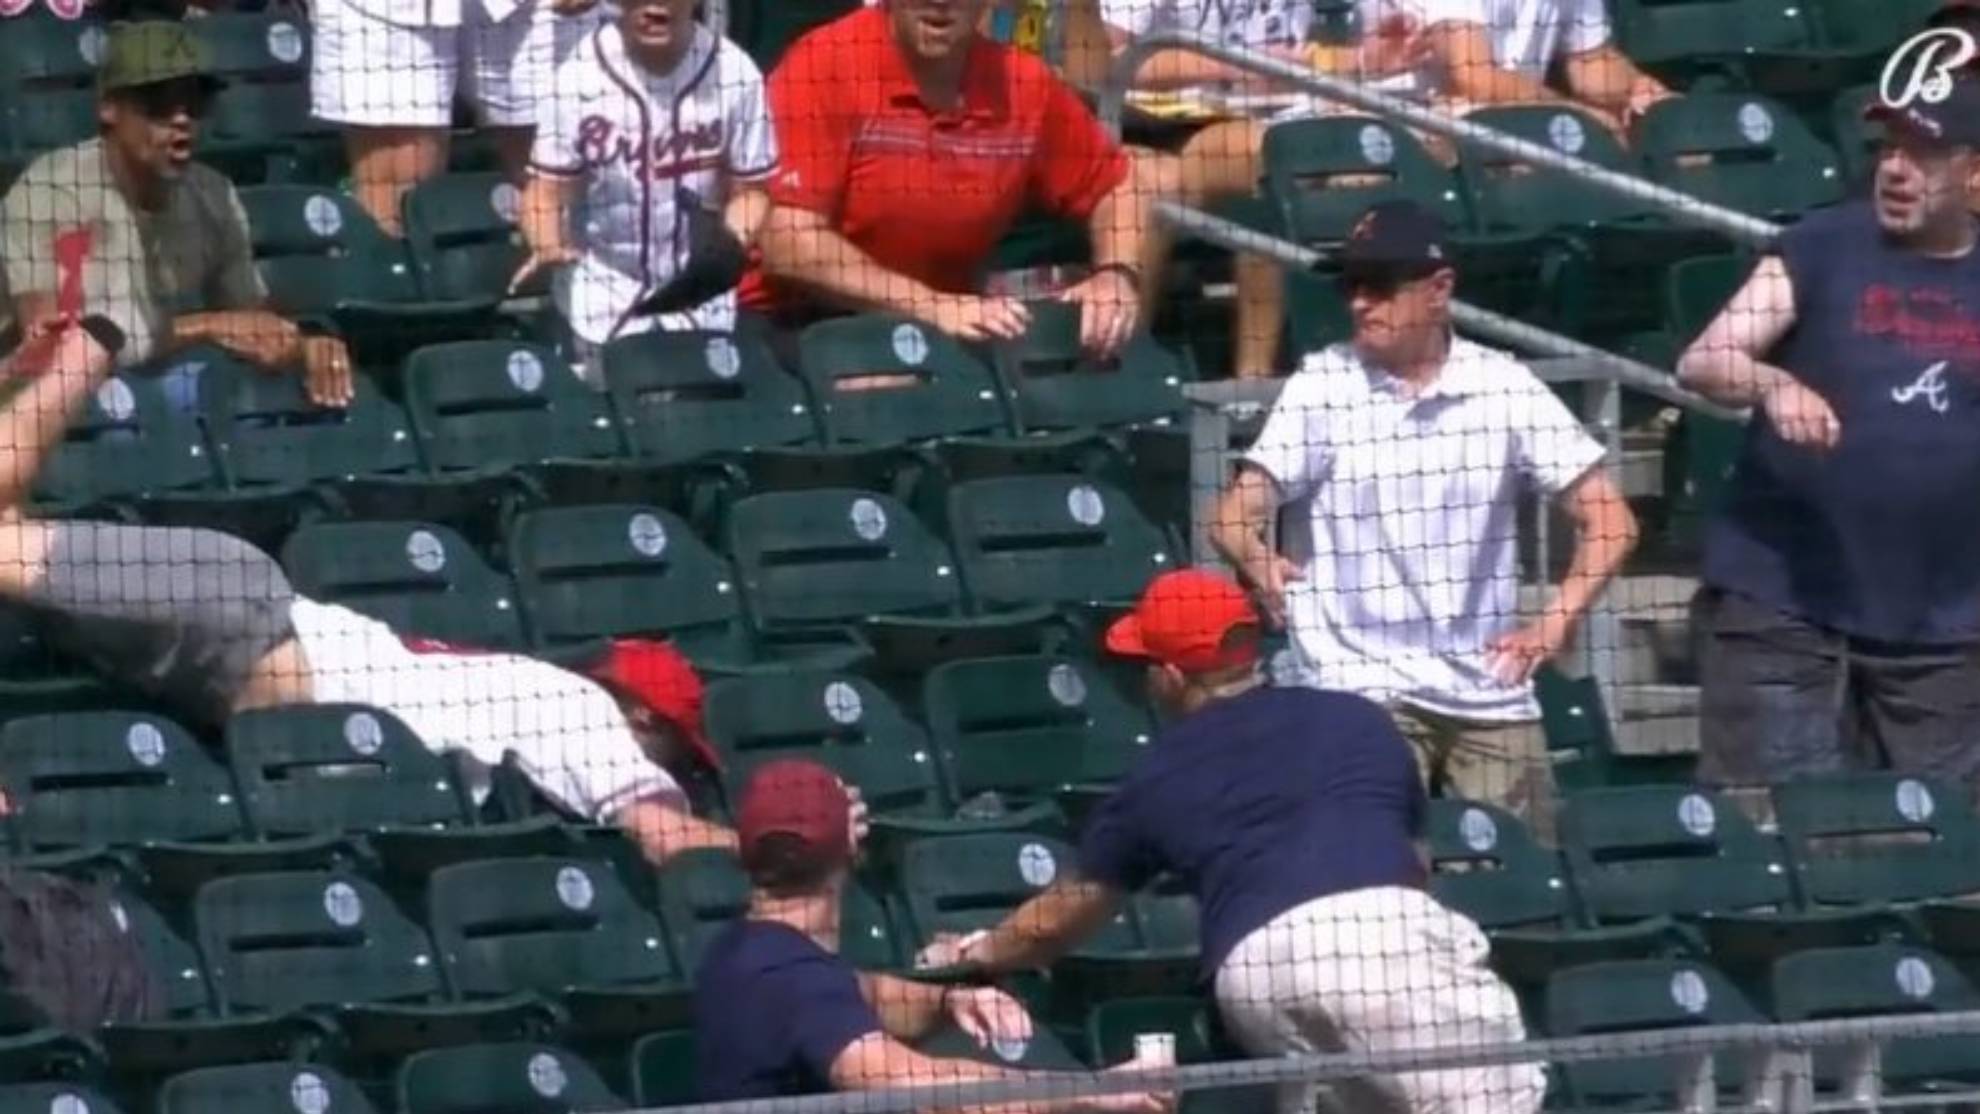 Braves fan nearly breaks his face catching a foul ball (VIDEO)